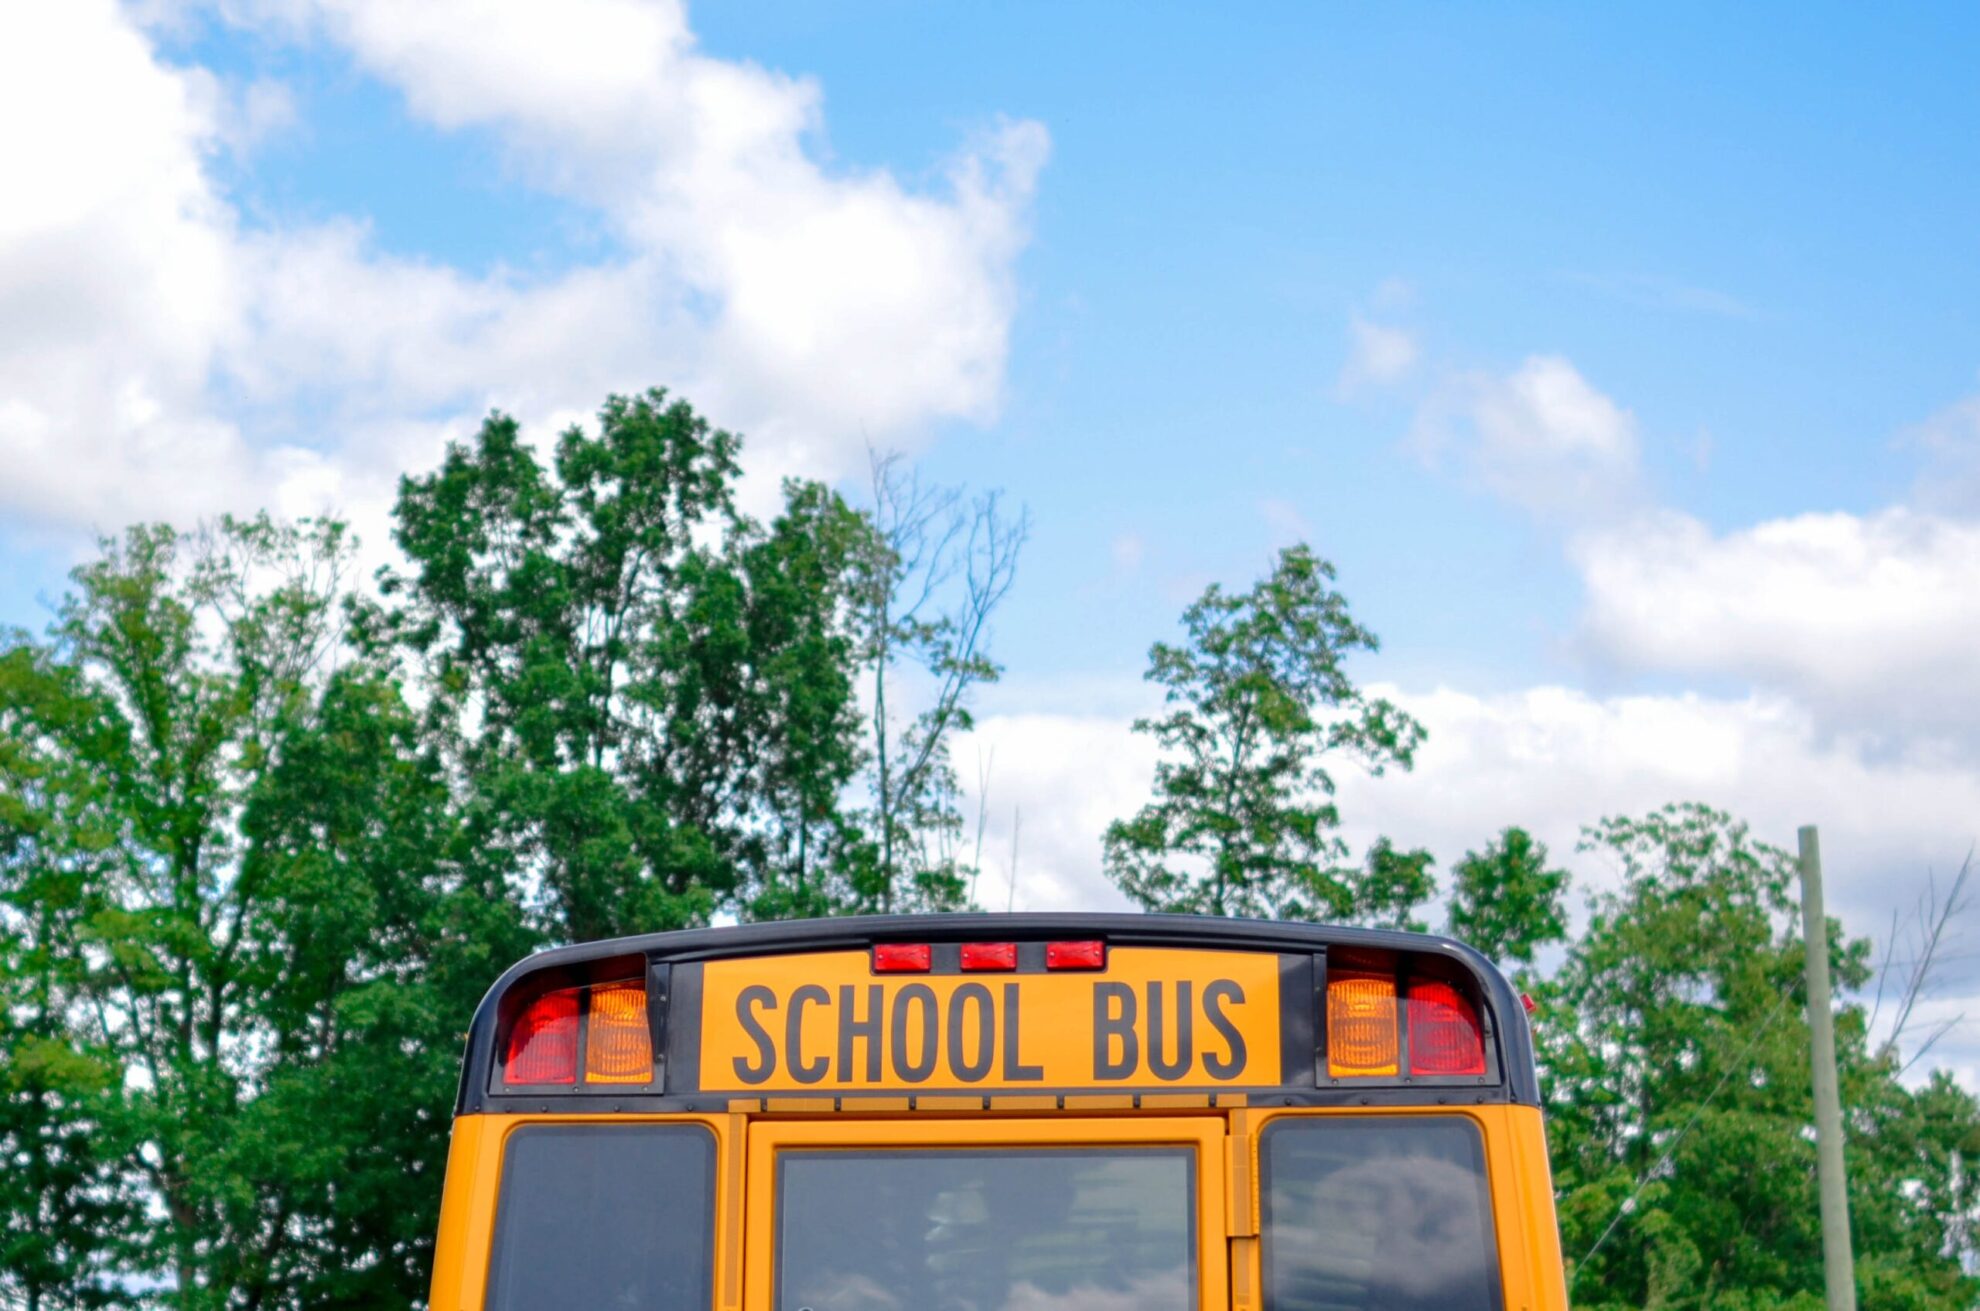 A schoolbus rear with green trees, a blue sky, and fluffy clouds above.